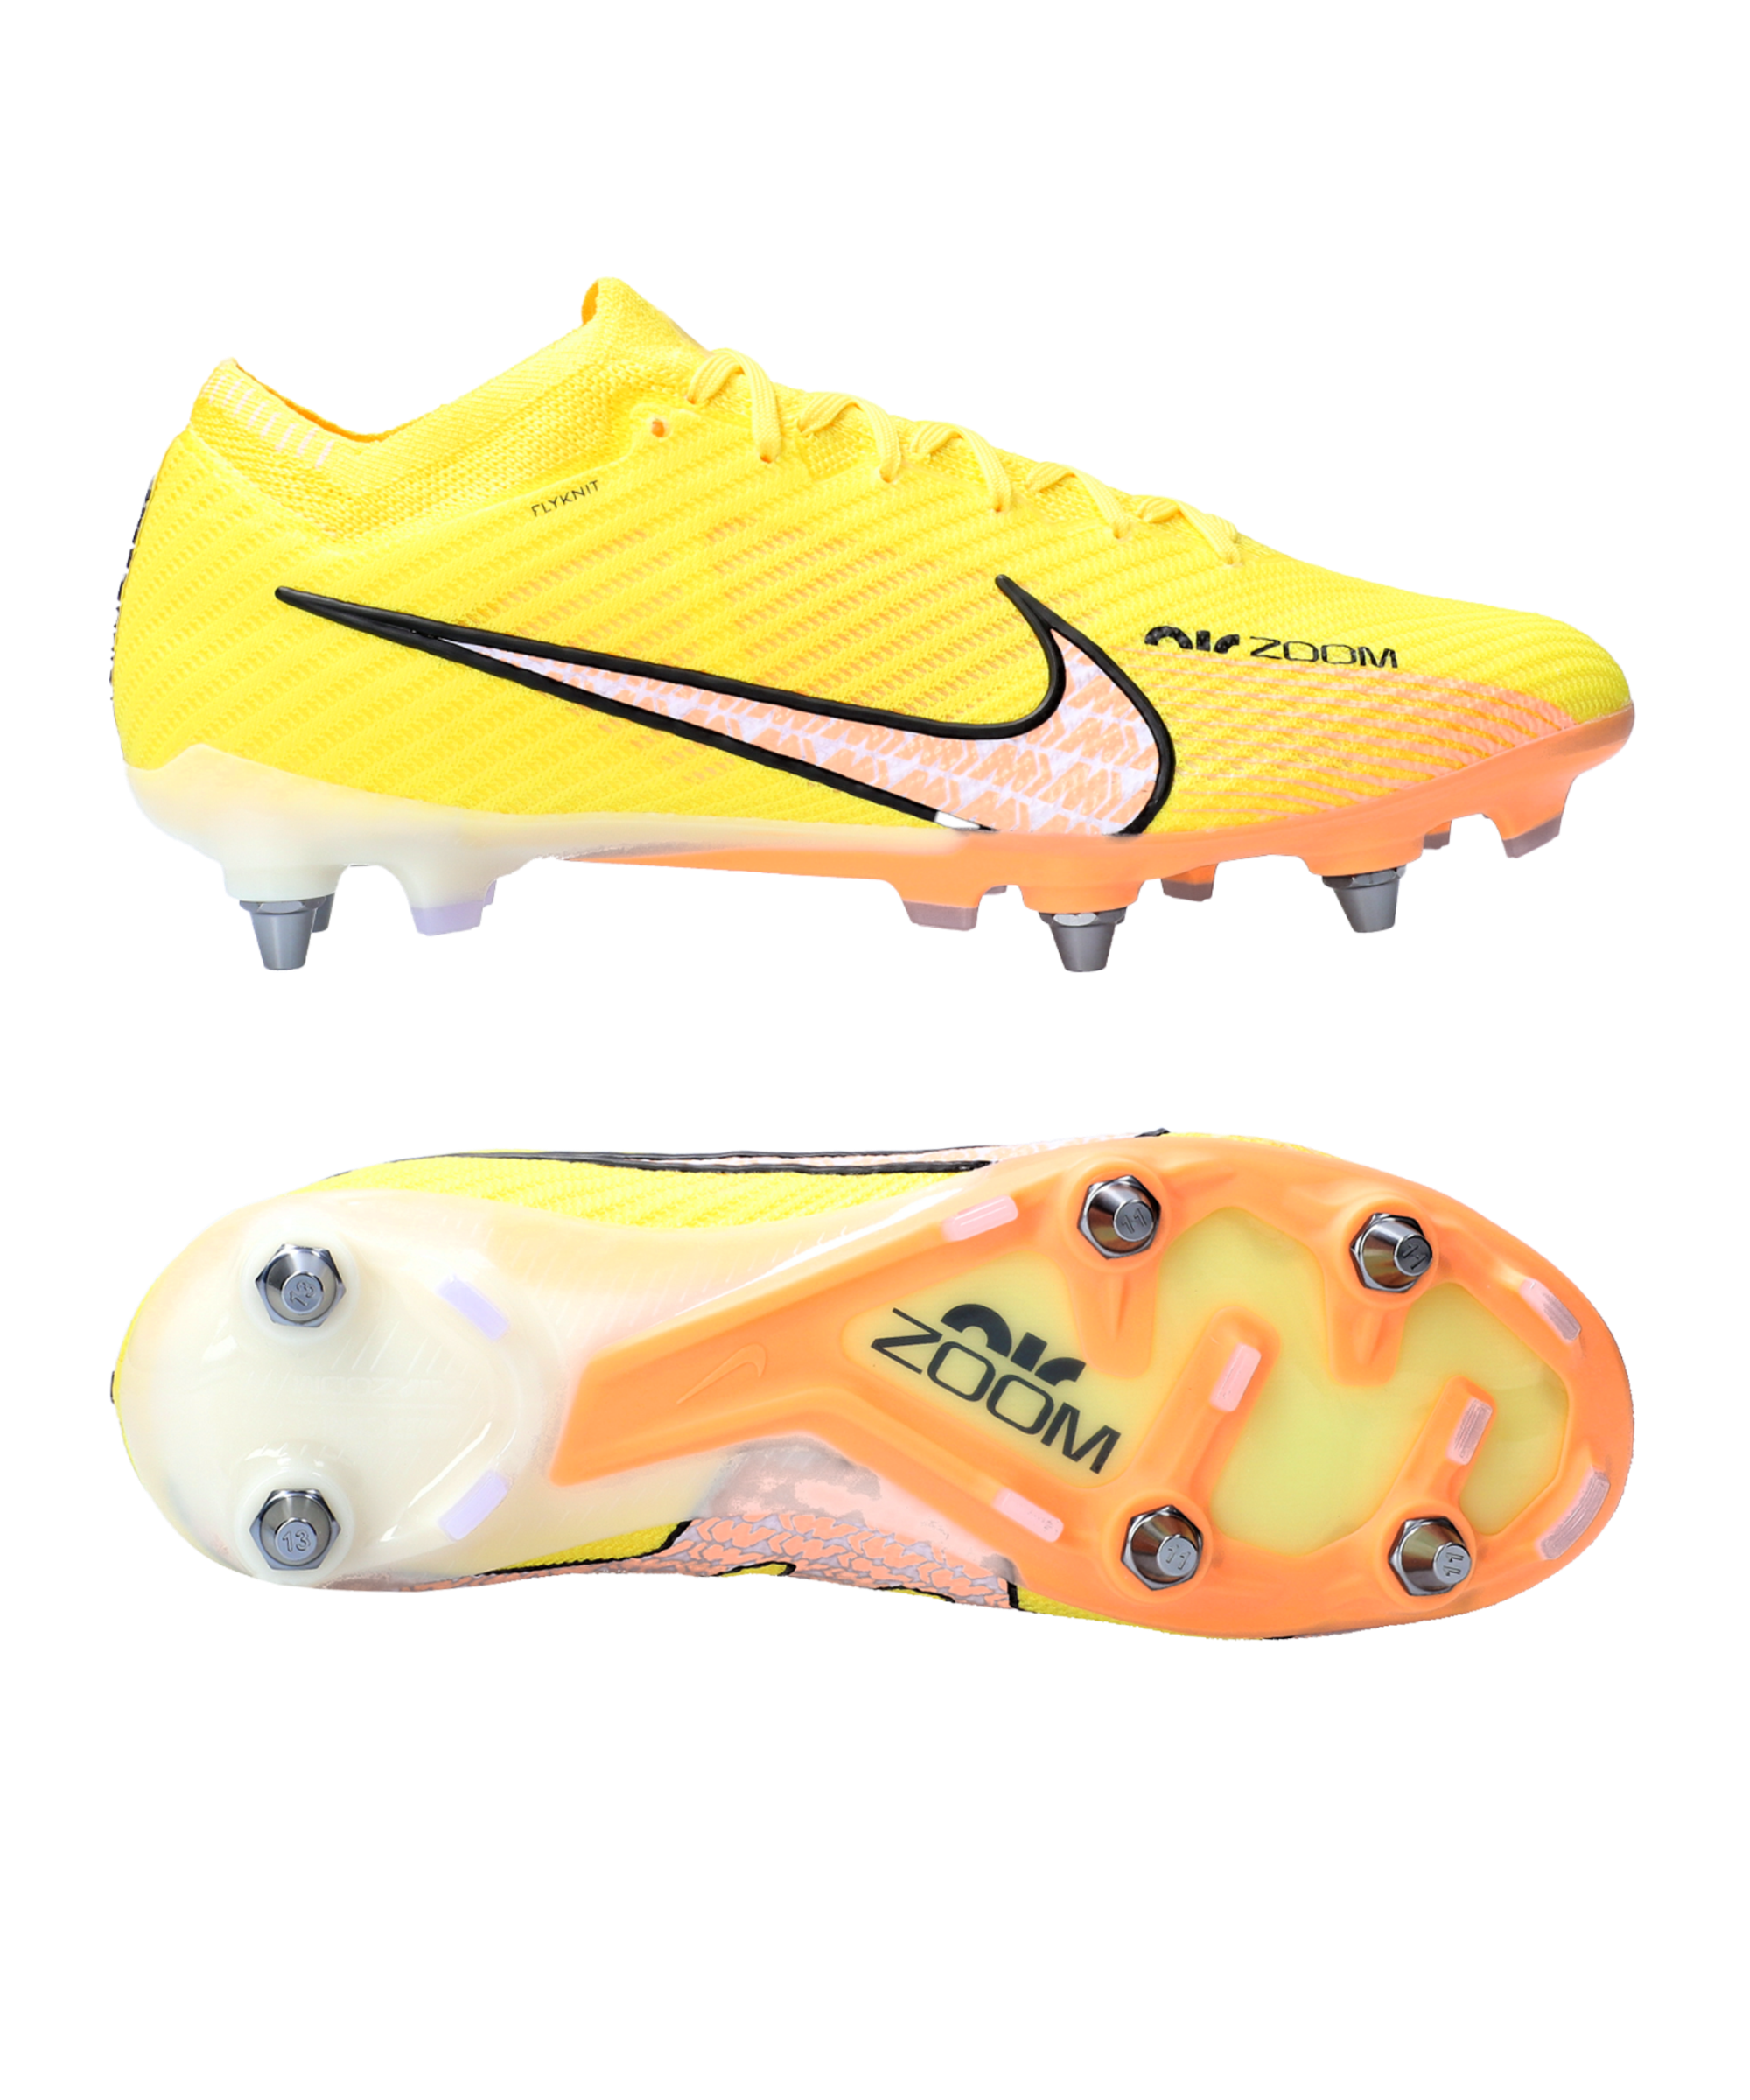 Nike Air Zoom Mercurial Vapor XV Elite SG-Pro Lucent Pro-Player-Edition -  Yellow